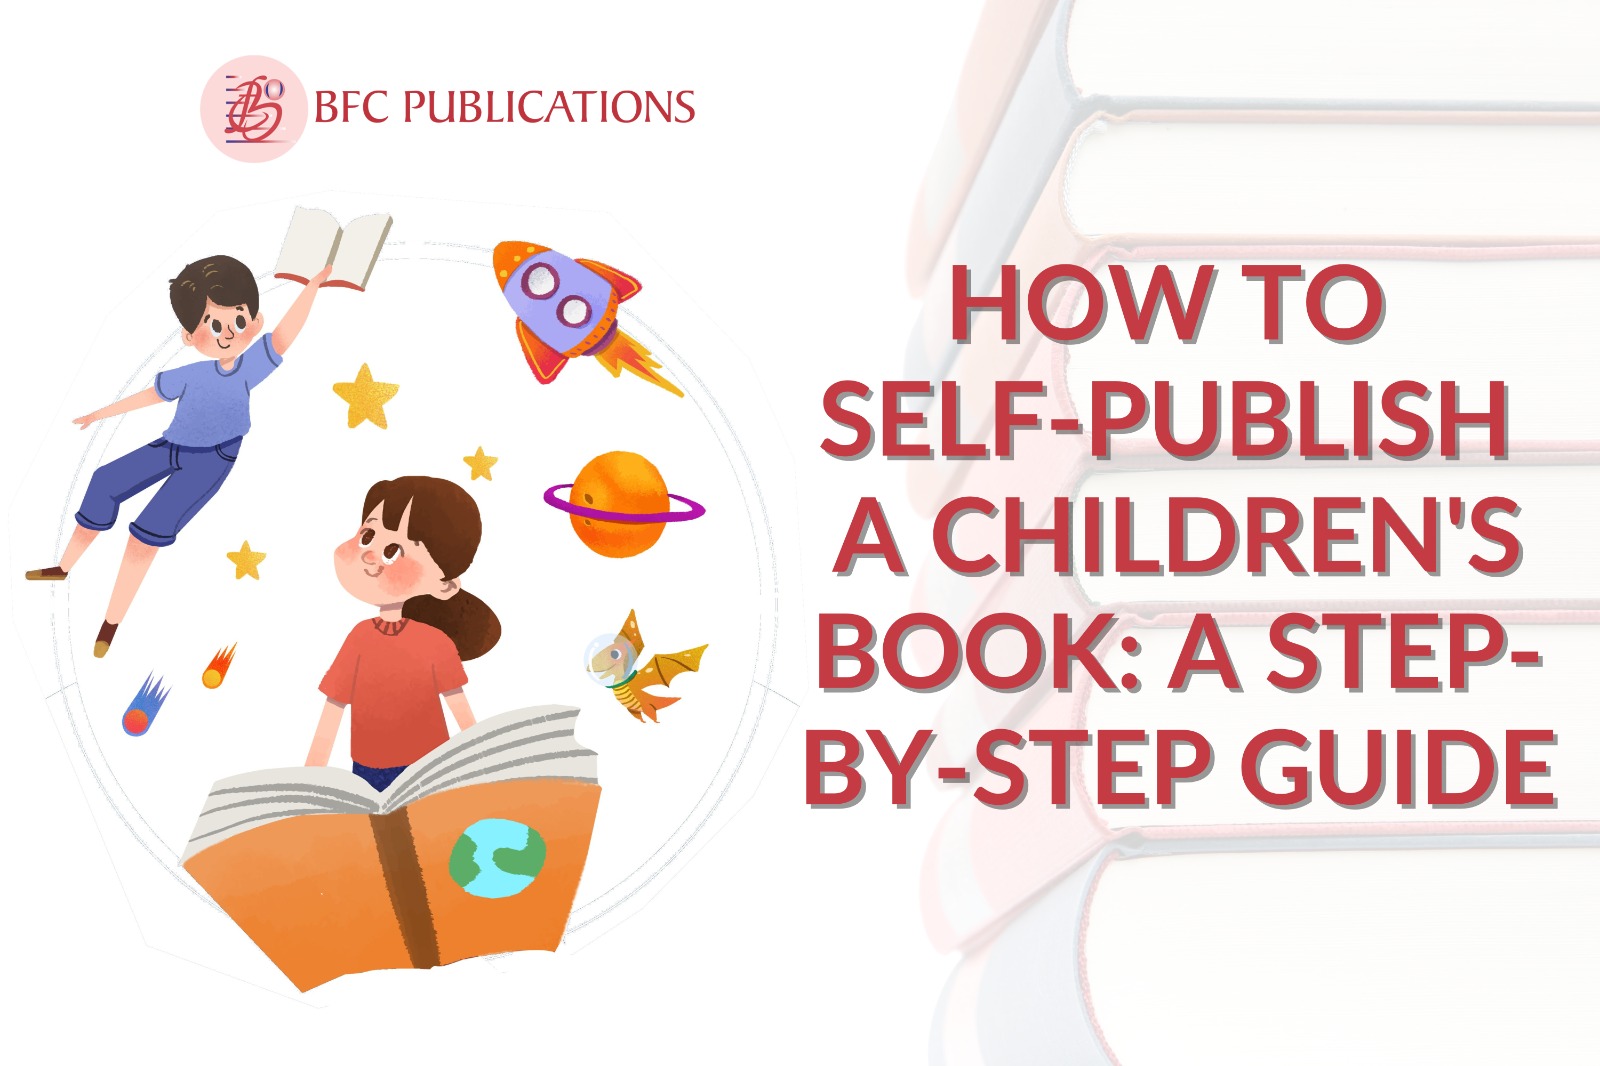 How to Self-Publish a Children's Book